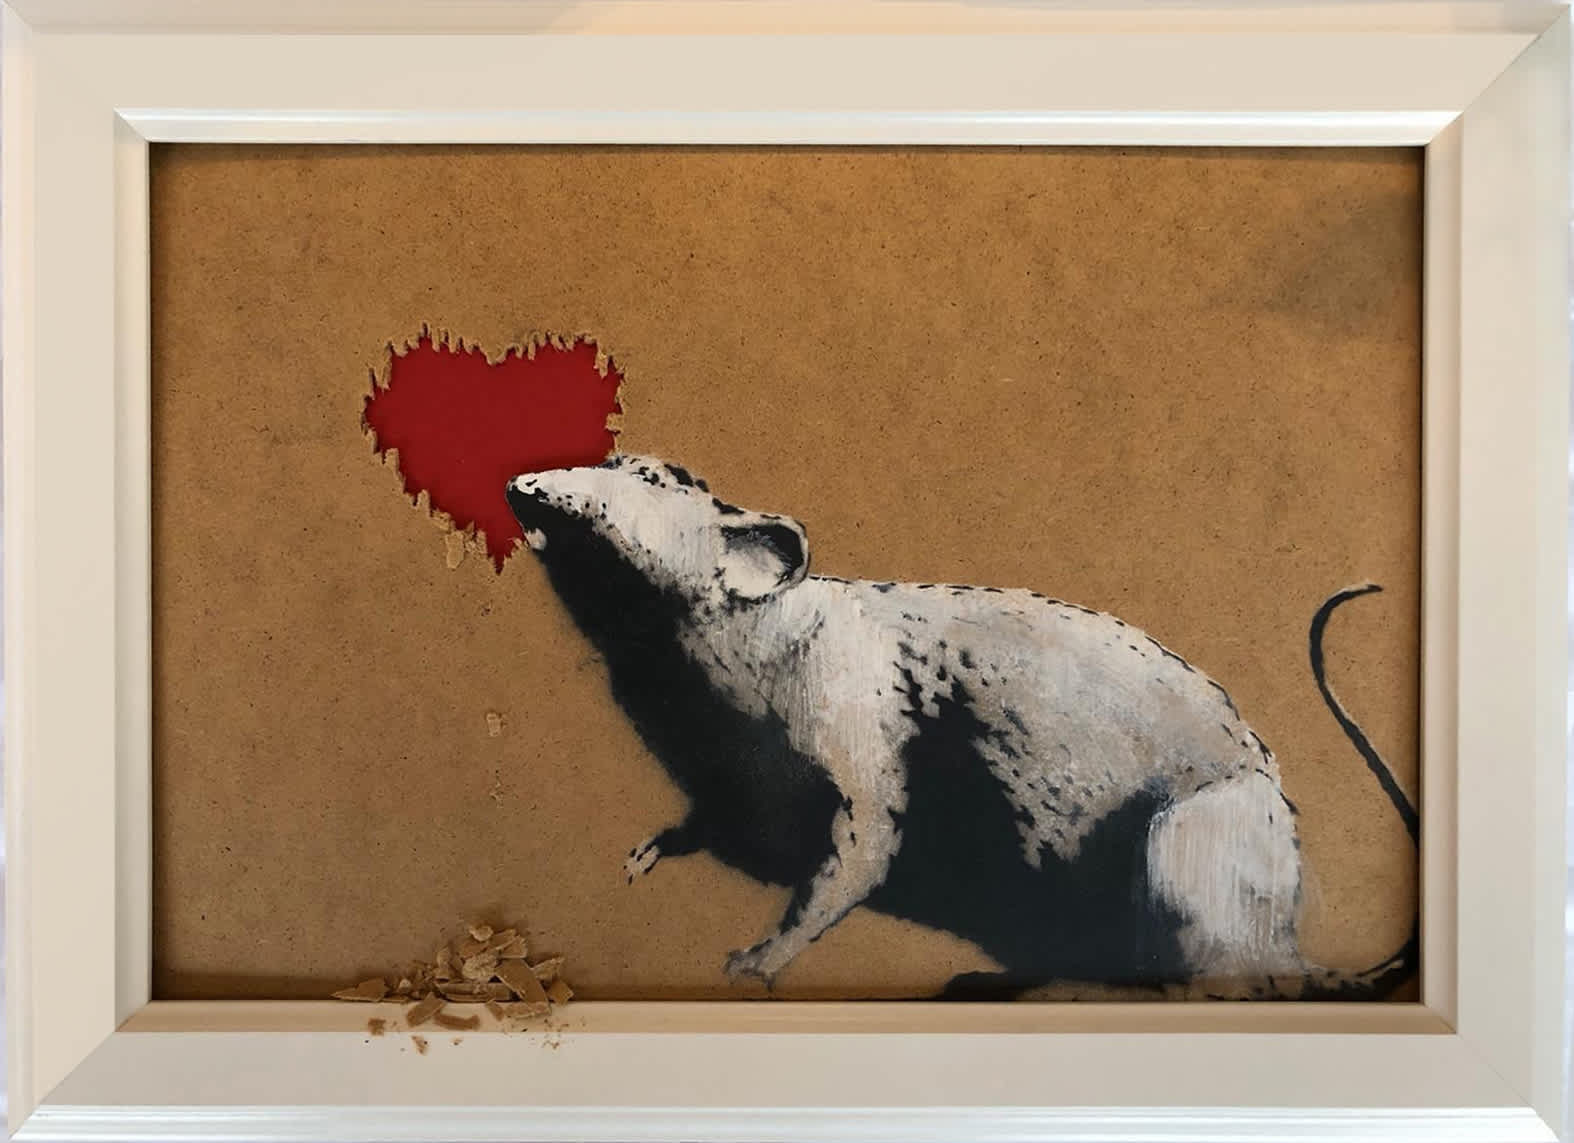 Banksy Rat and Heart Spray paint and emulsion on board